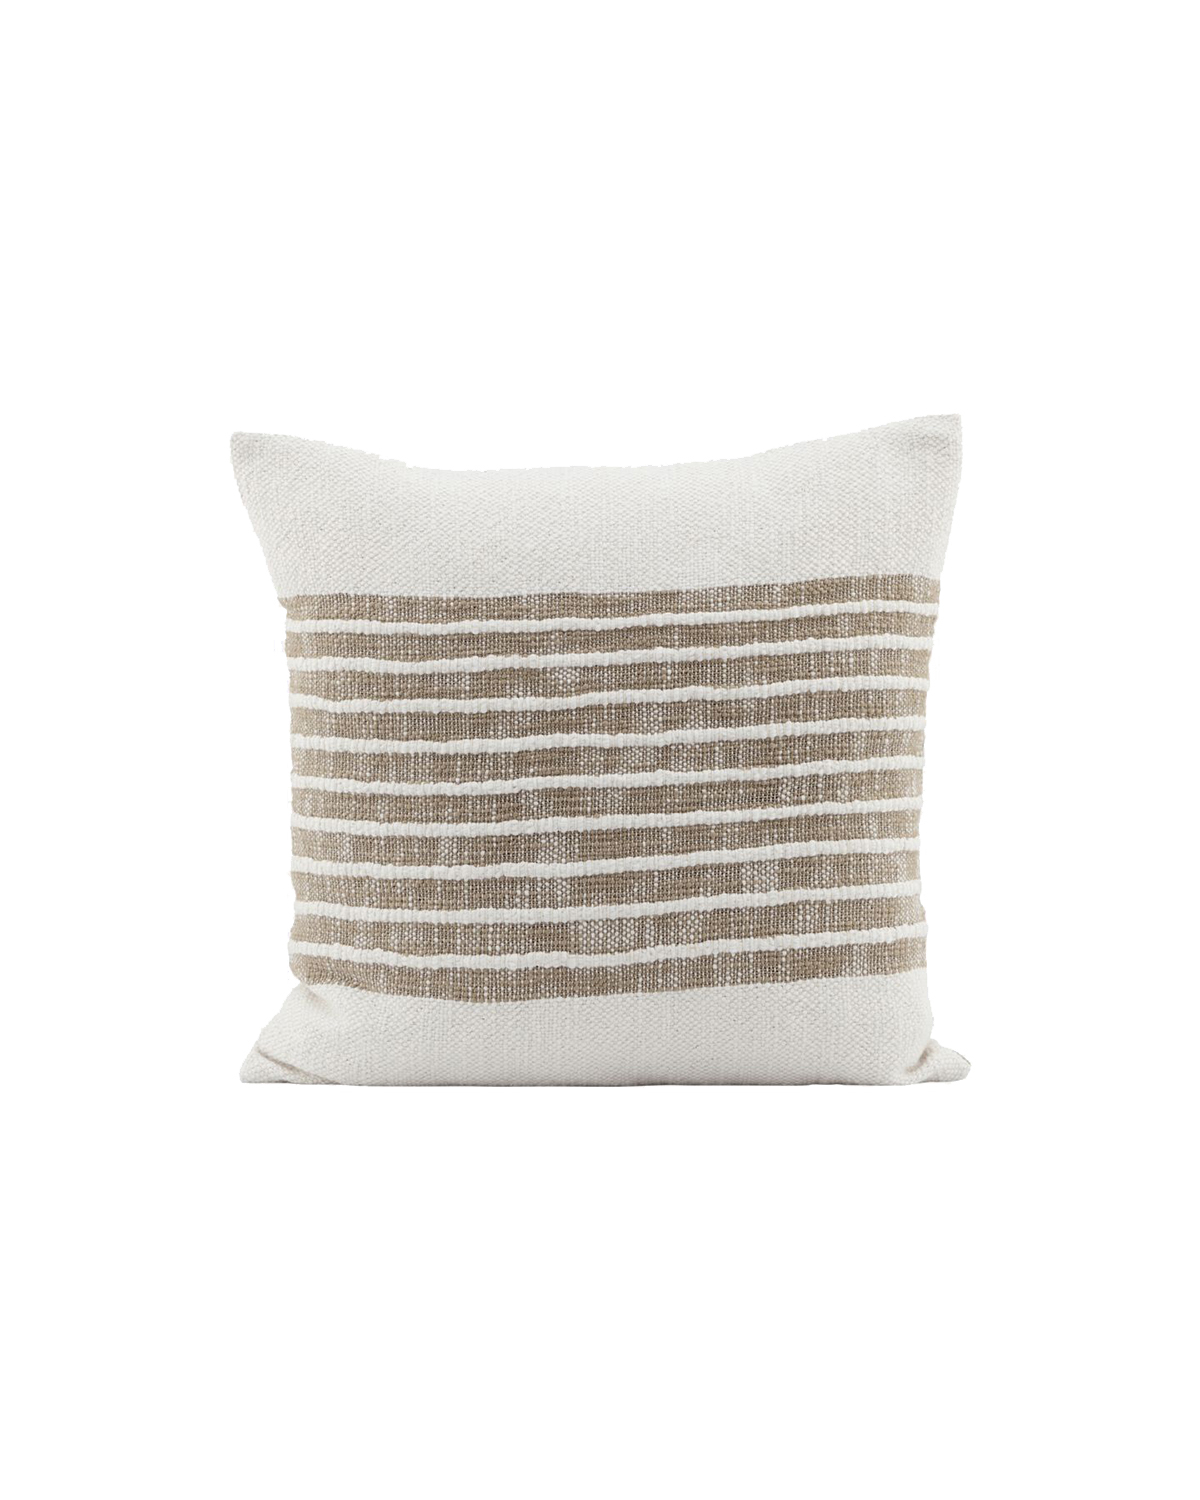 House Doctor Cotton Cushion Cover with Central Stripes in Beige and Camel